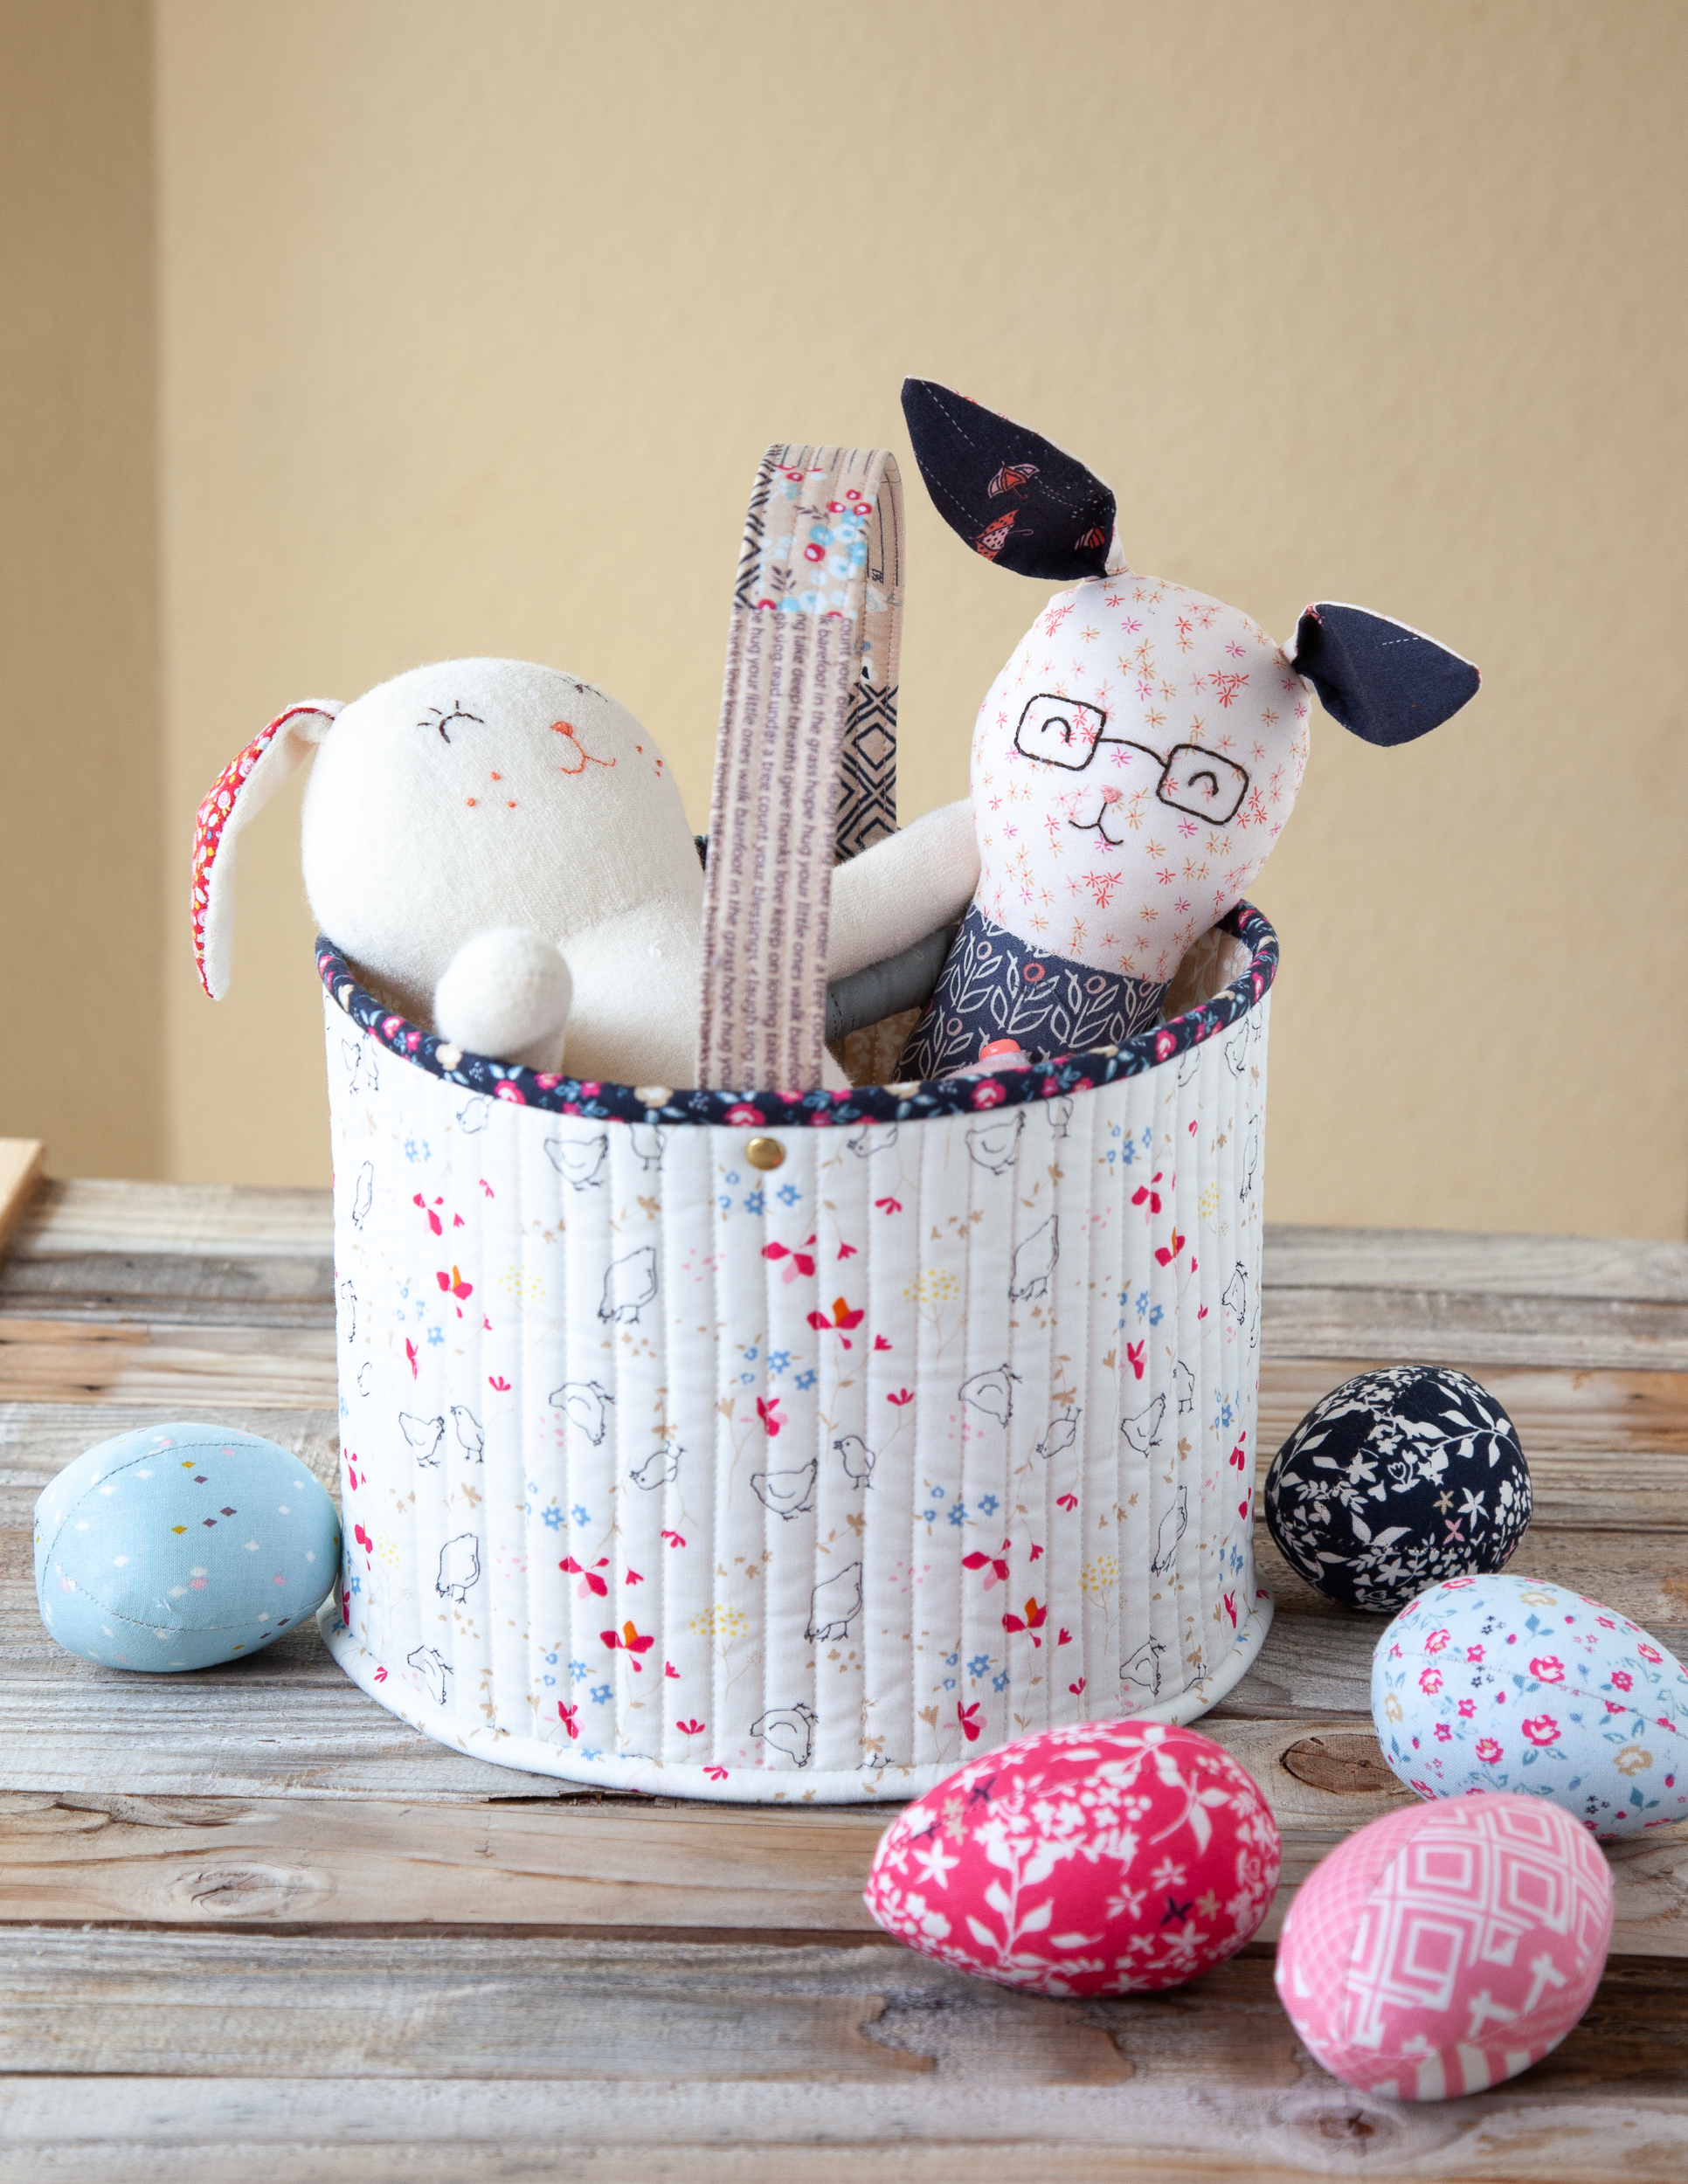 baskets made out of fabric